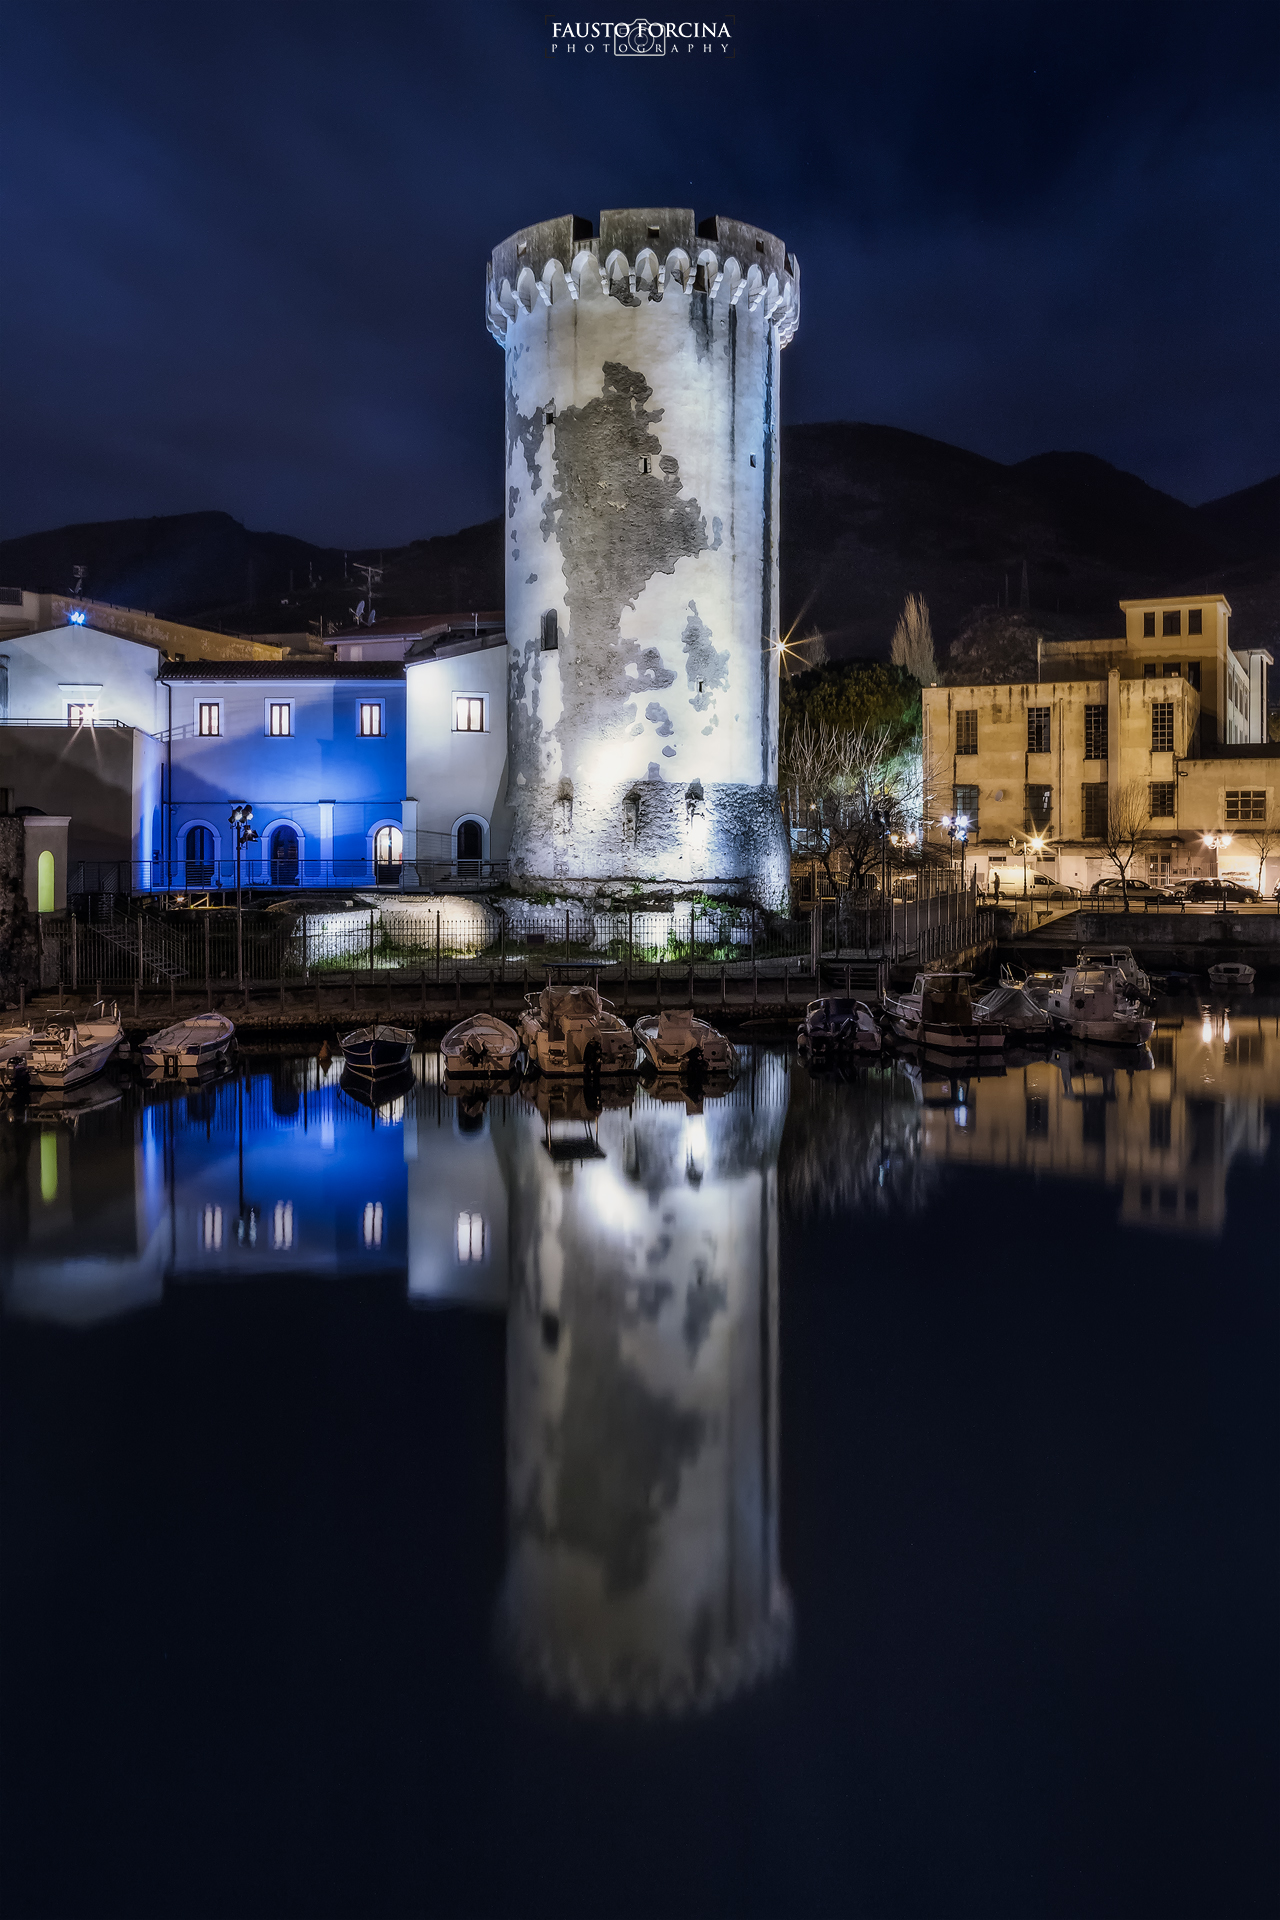 Tower of Mola and its reflection...